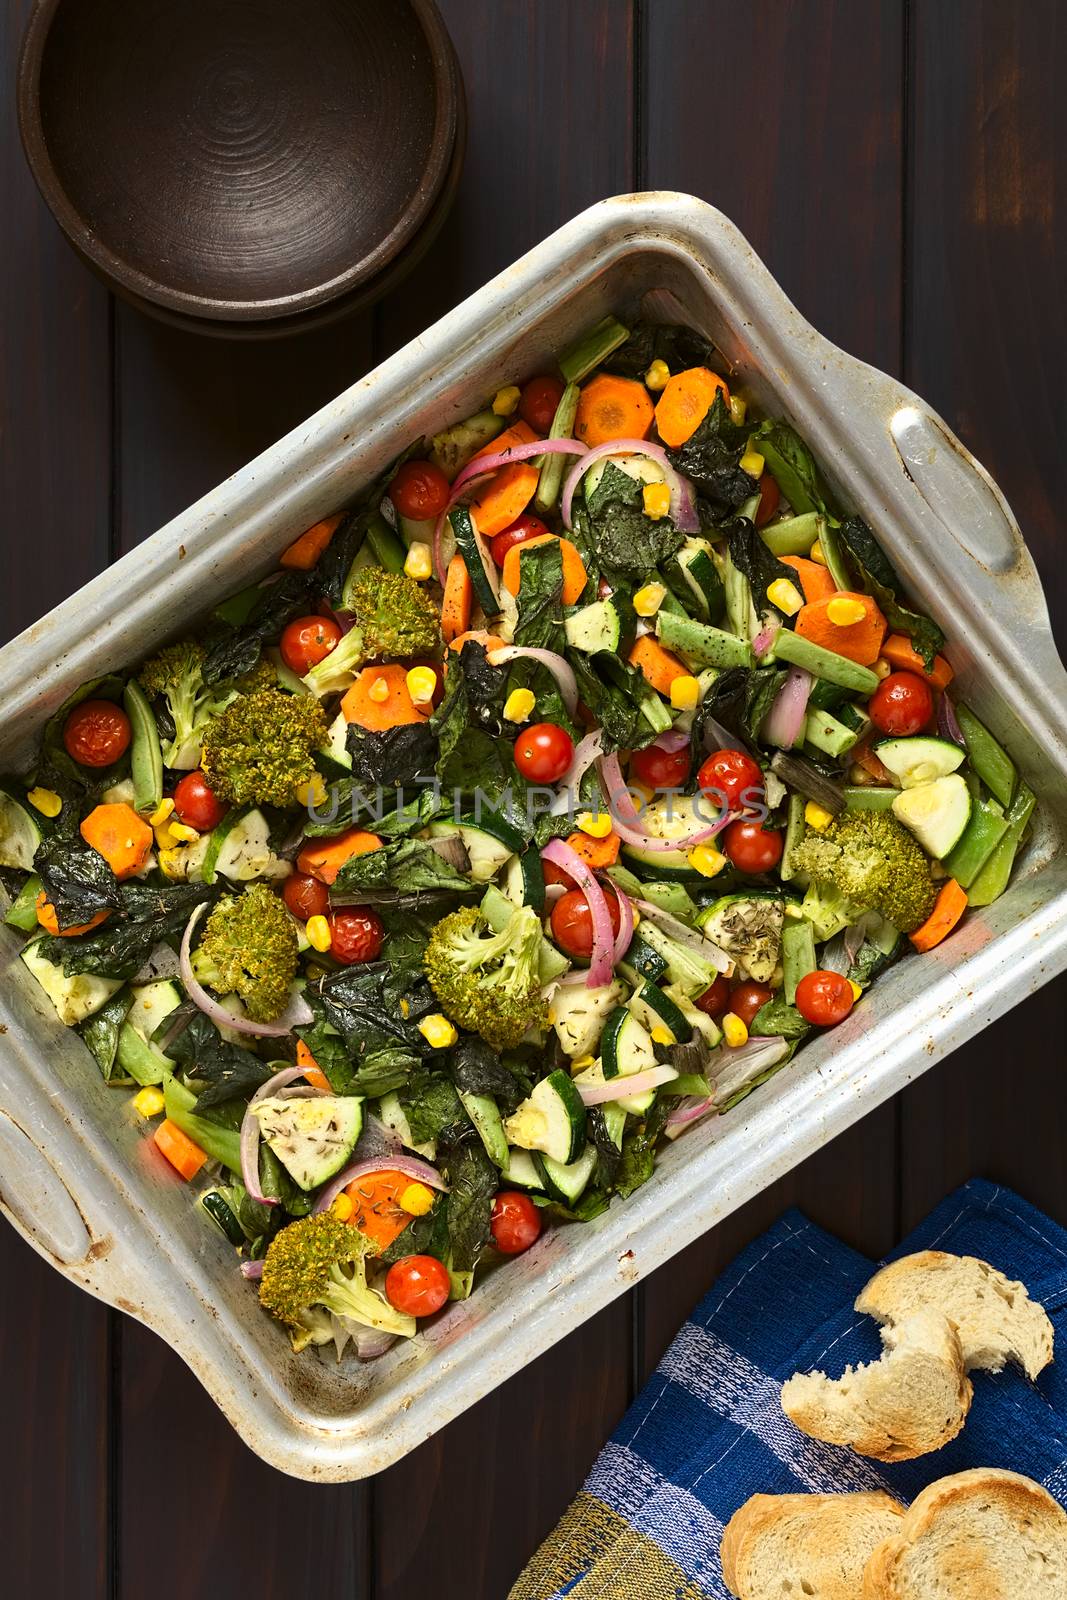 Baked Vegetables in Baking Dish  by ildi